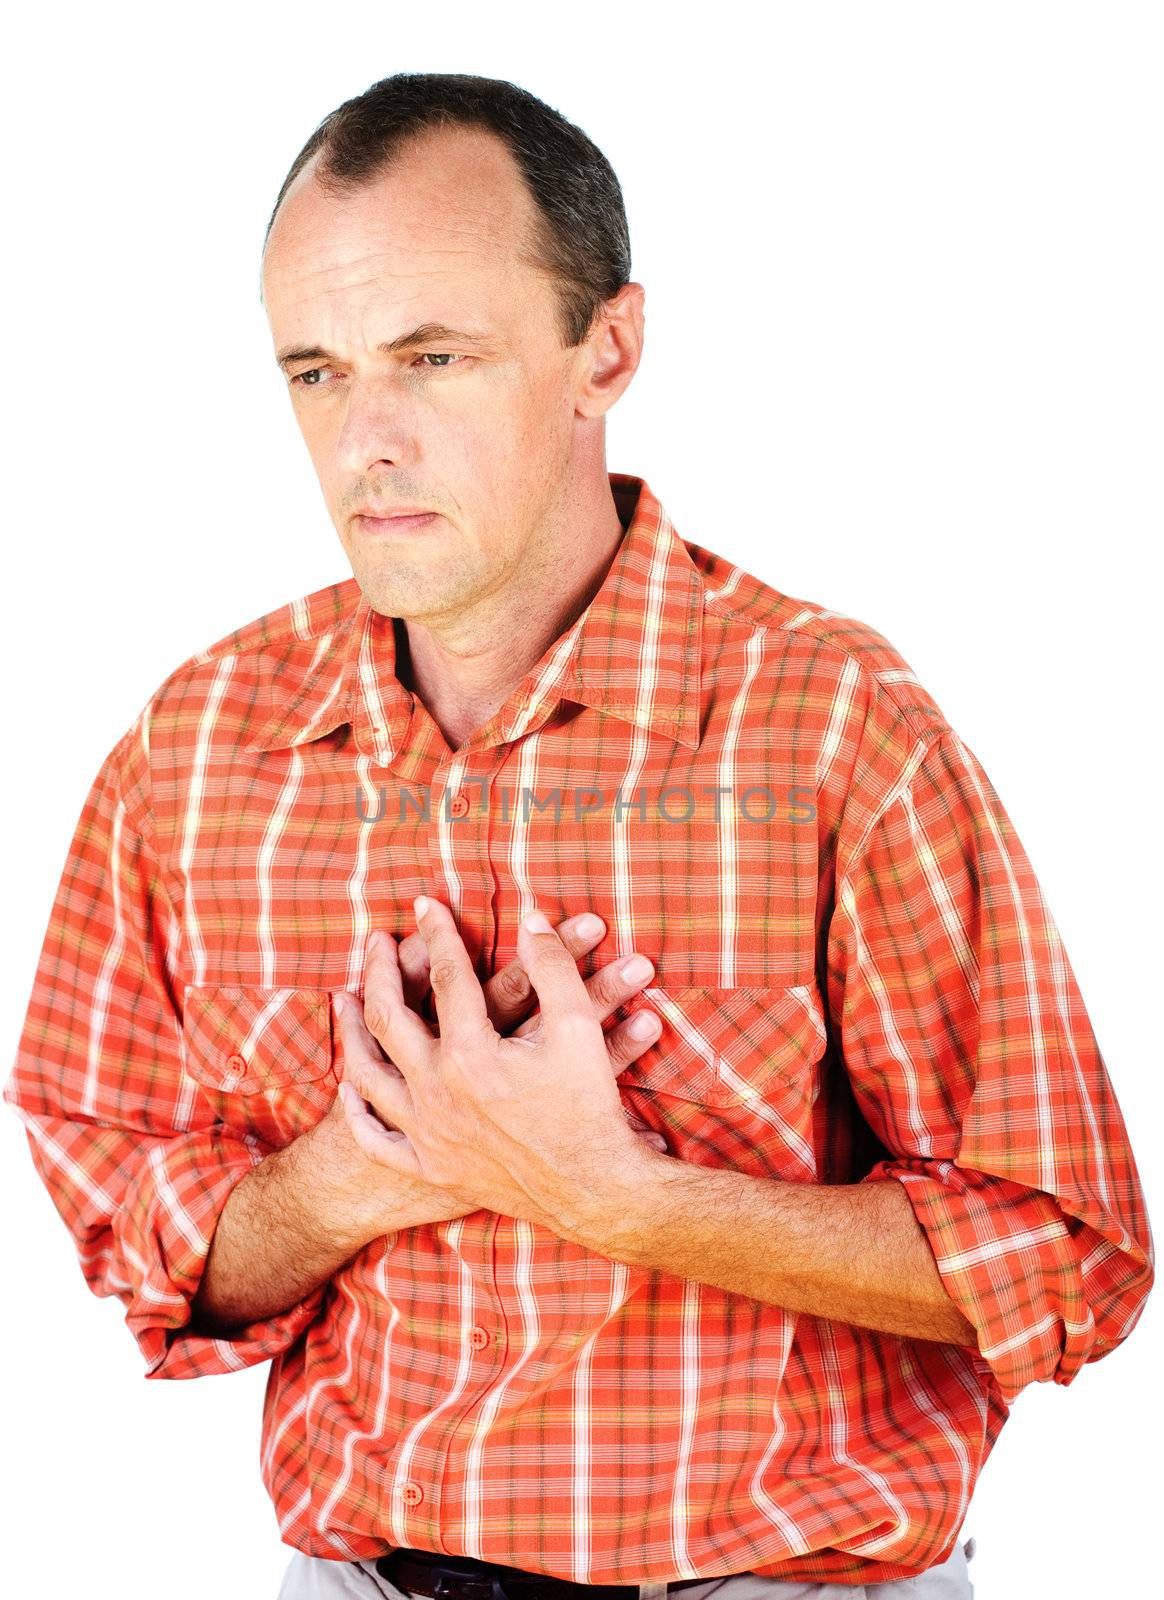 Man have a heart attack, isolated on white background